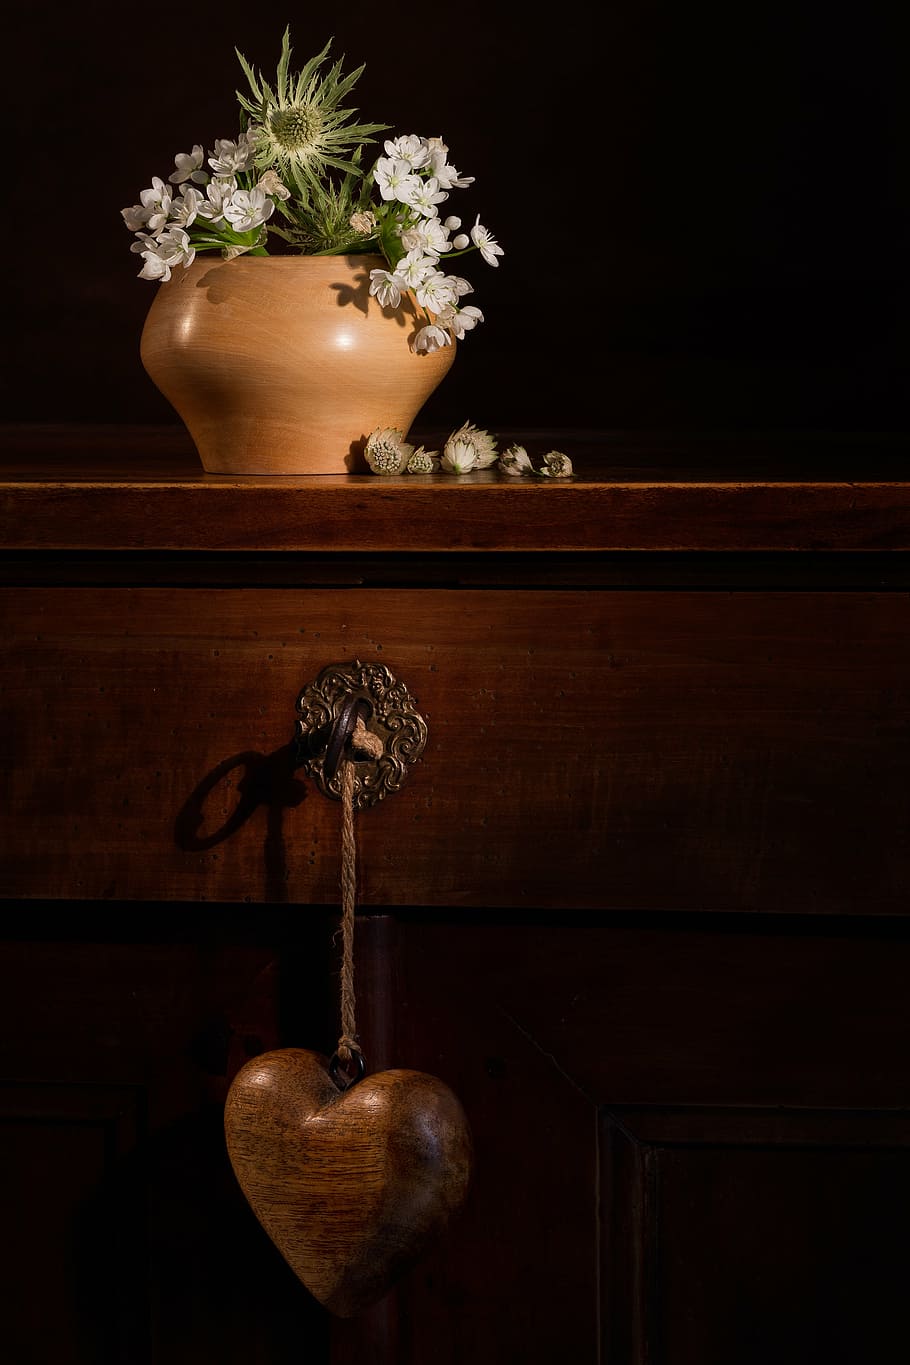 green, leafed, plant, brown, vase, top, wooden, table, still lifes, still life